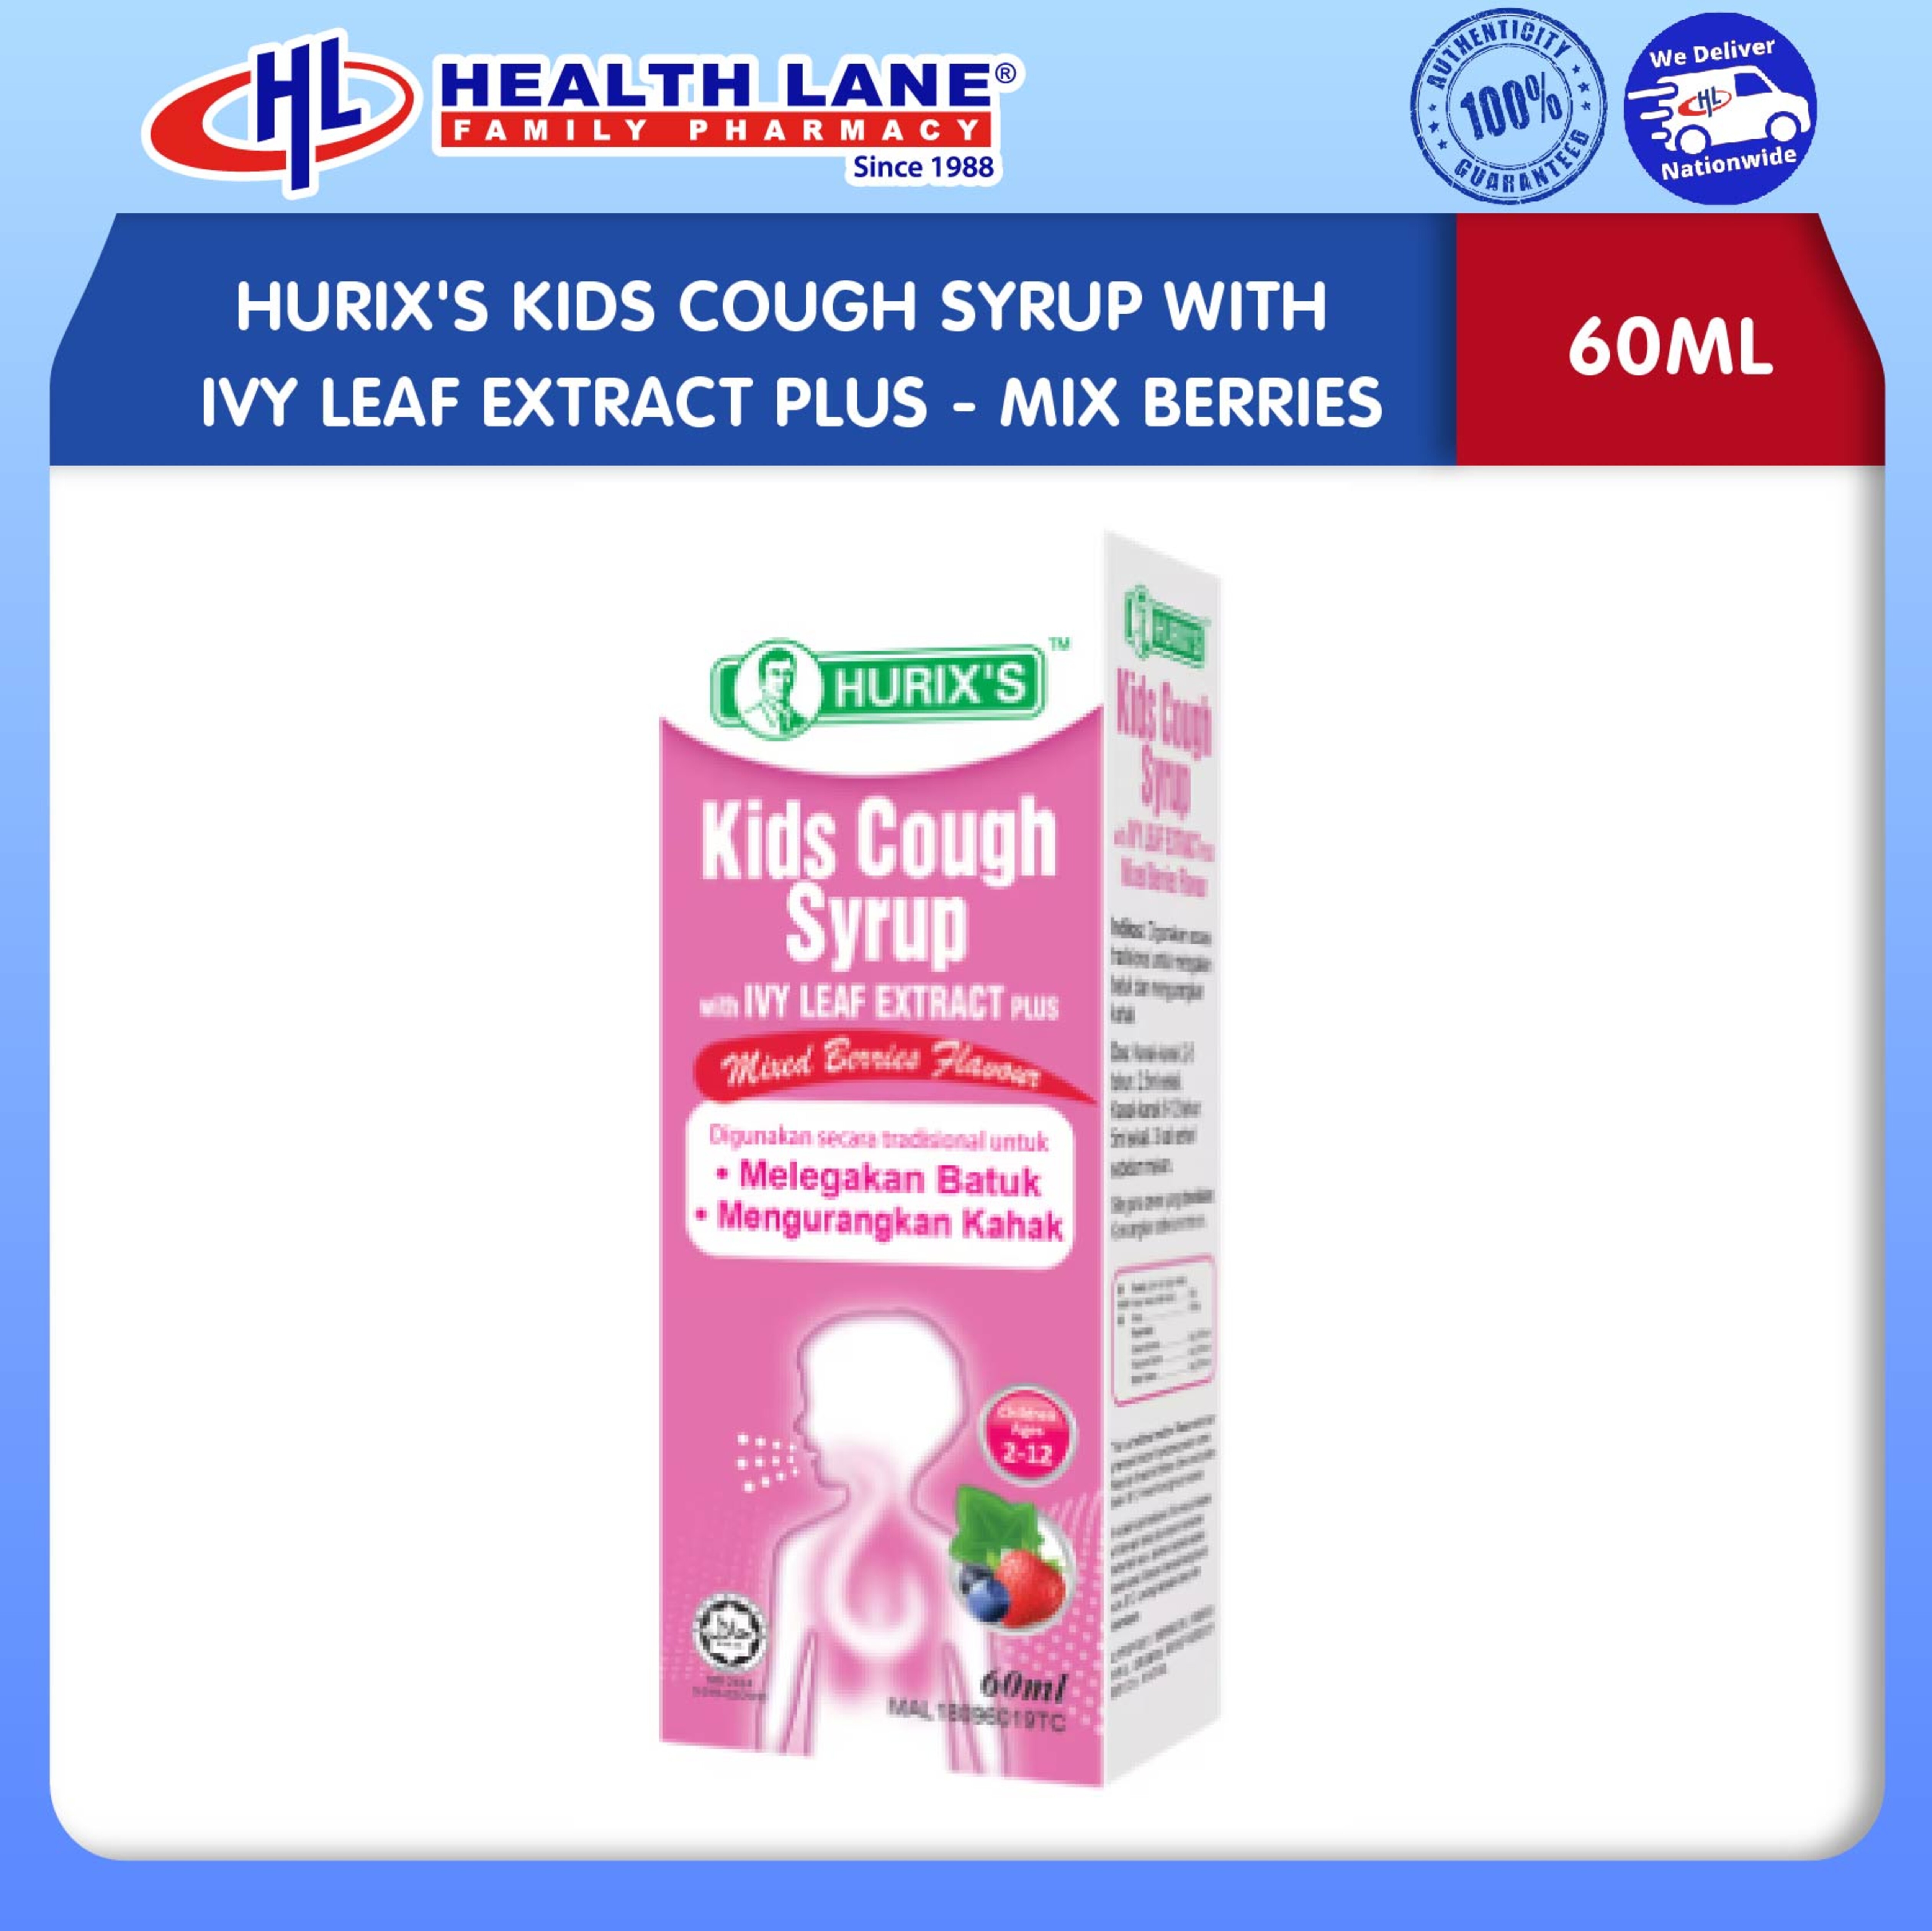 HURIX'S KIDS COUGH SYRUP WITH IVY LEAF EXTRACT PLUS (60ML) - MIX BERRIES